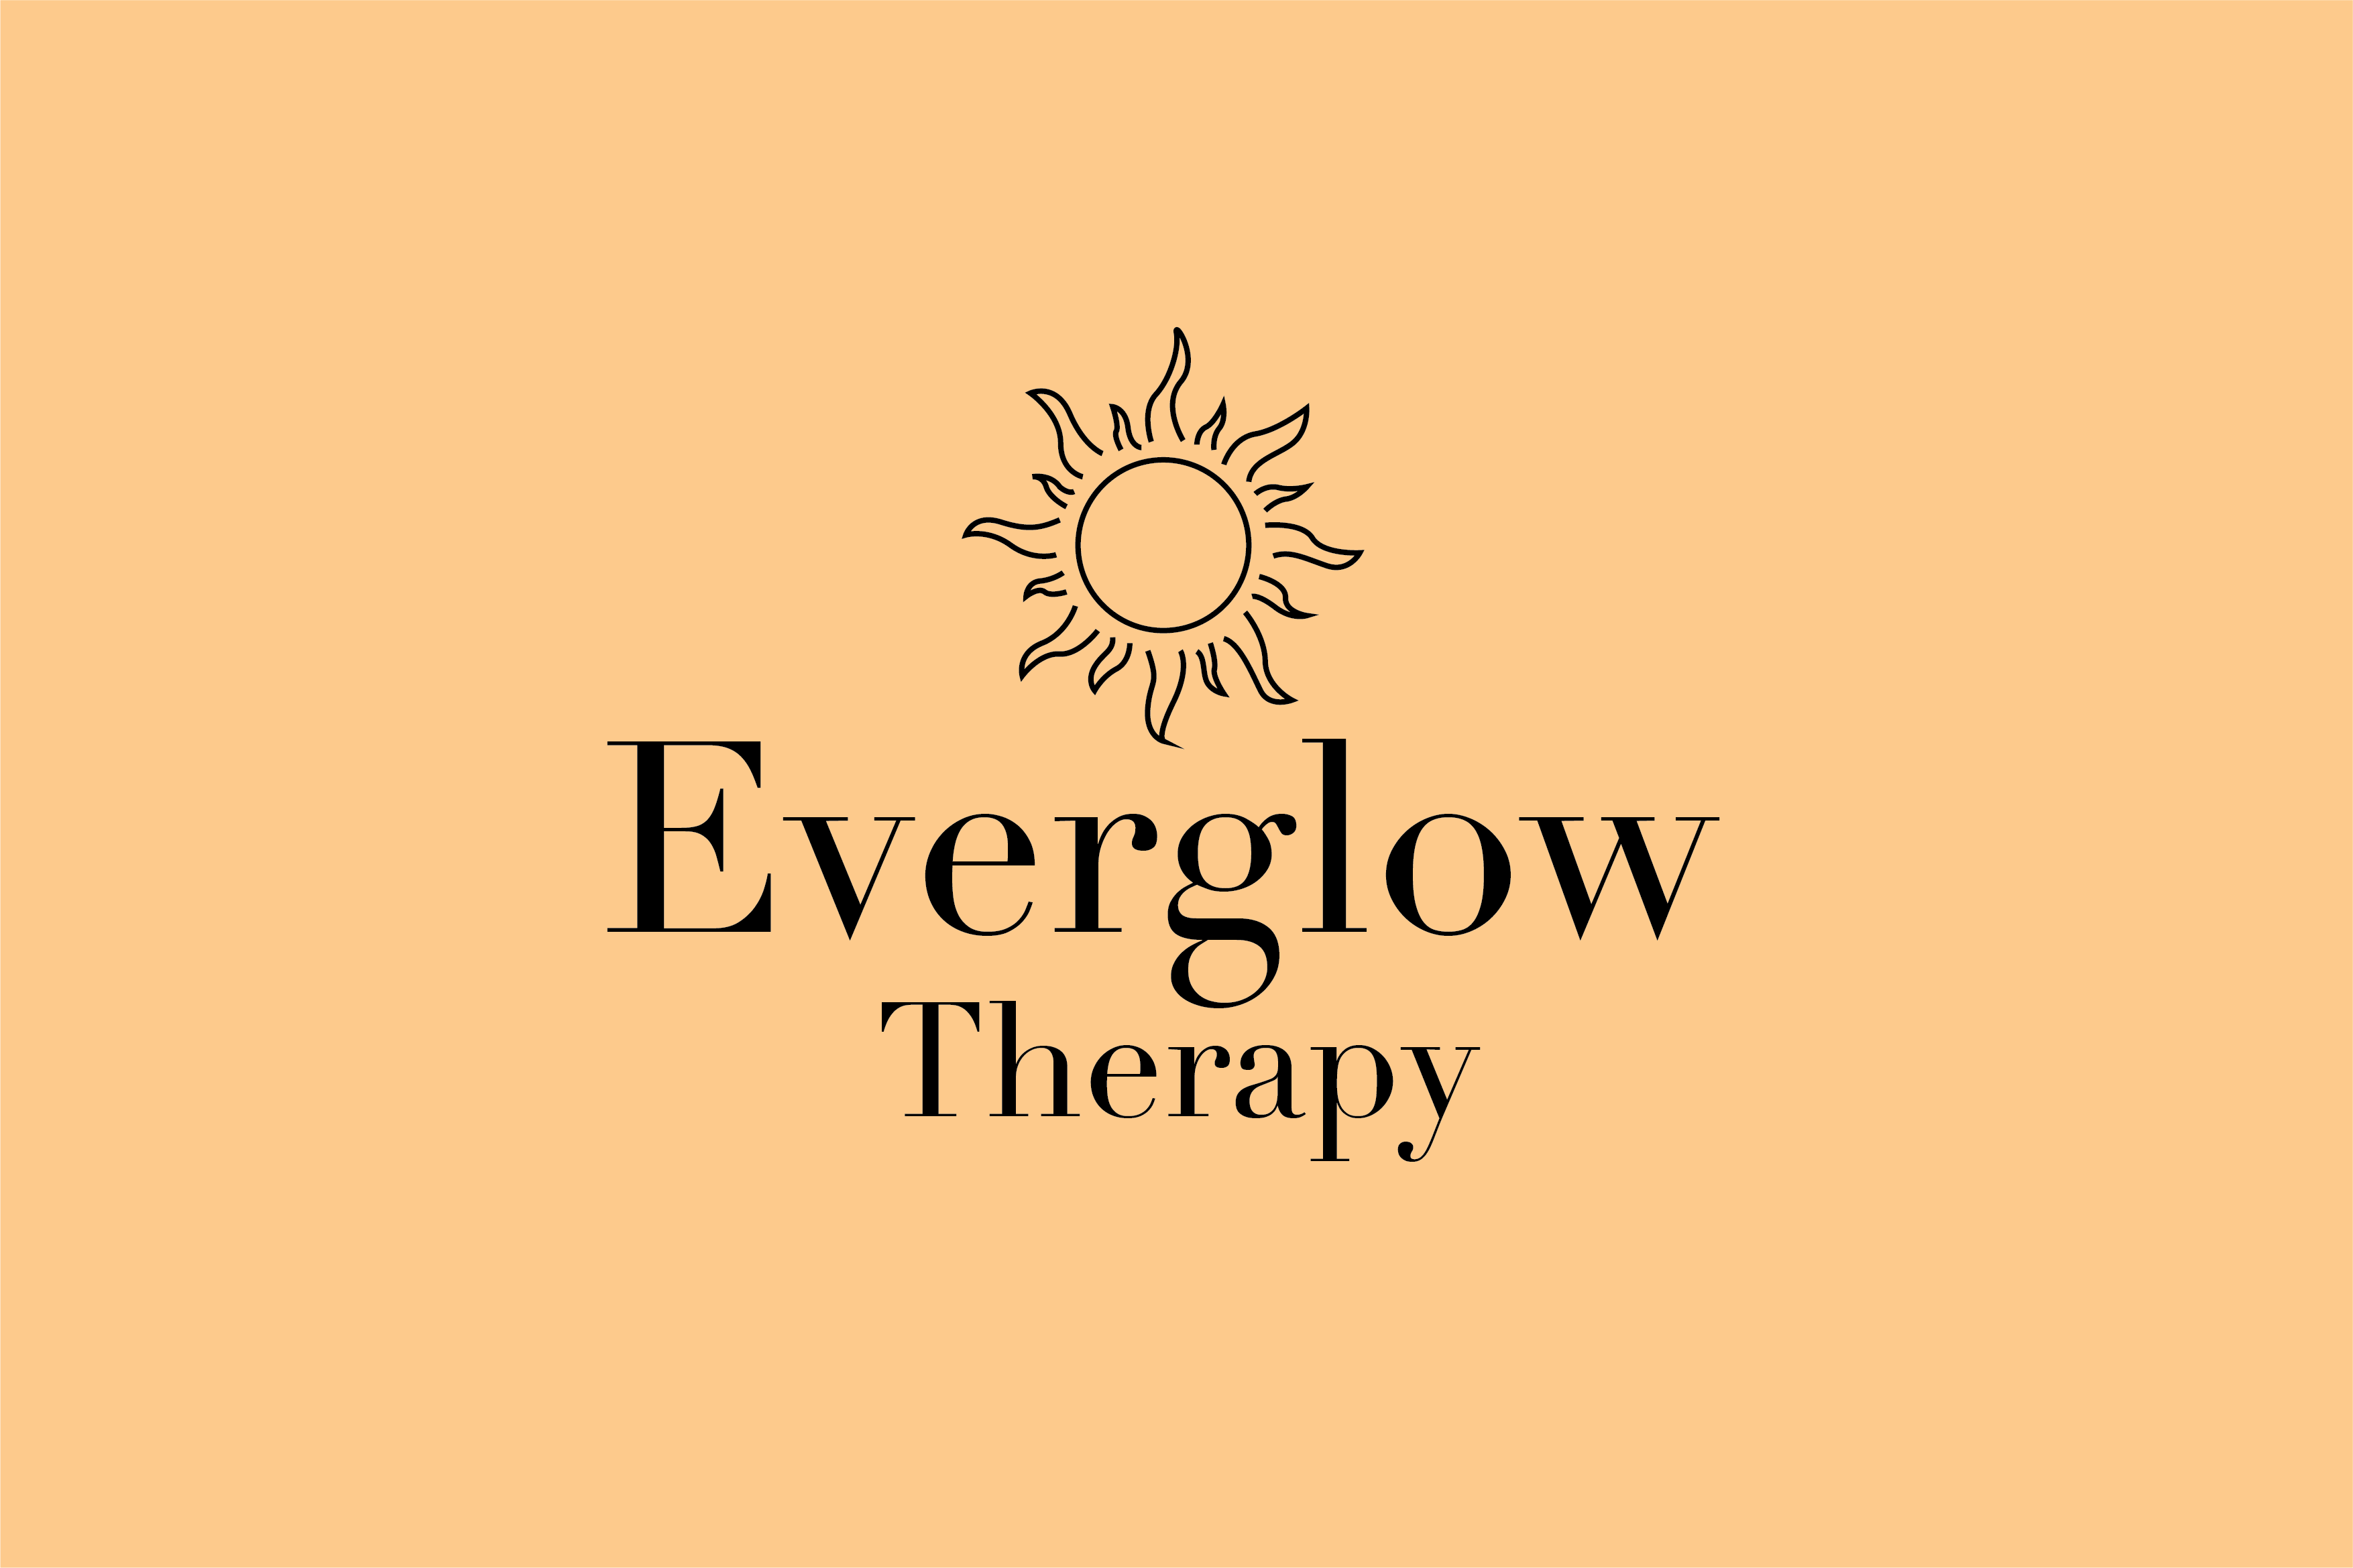 Everglow Therapy